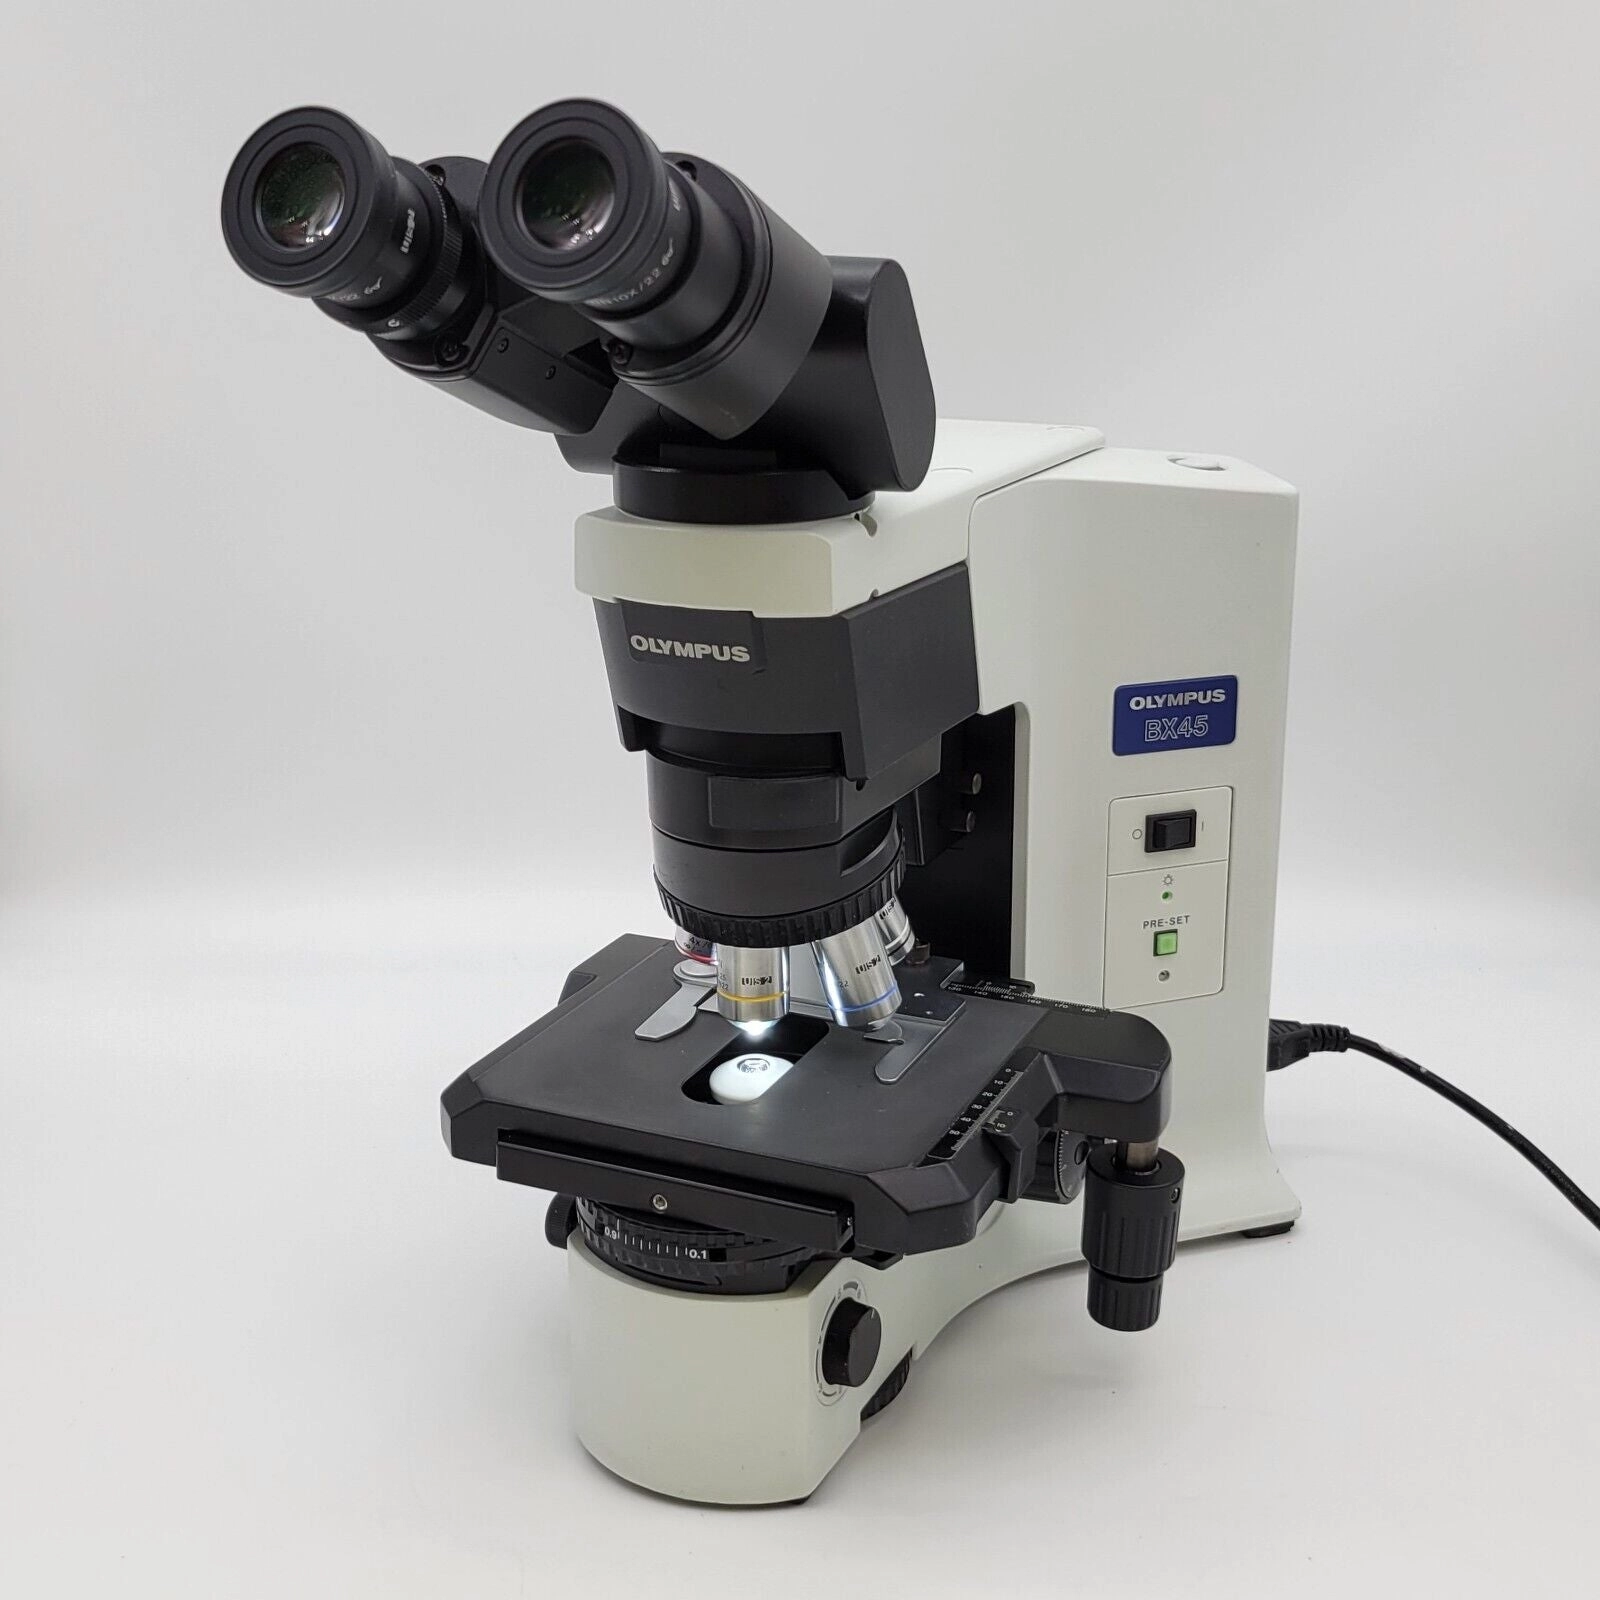 Olympus Microscope BX45 with Tilting Head and 100x Objective